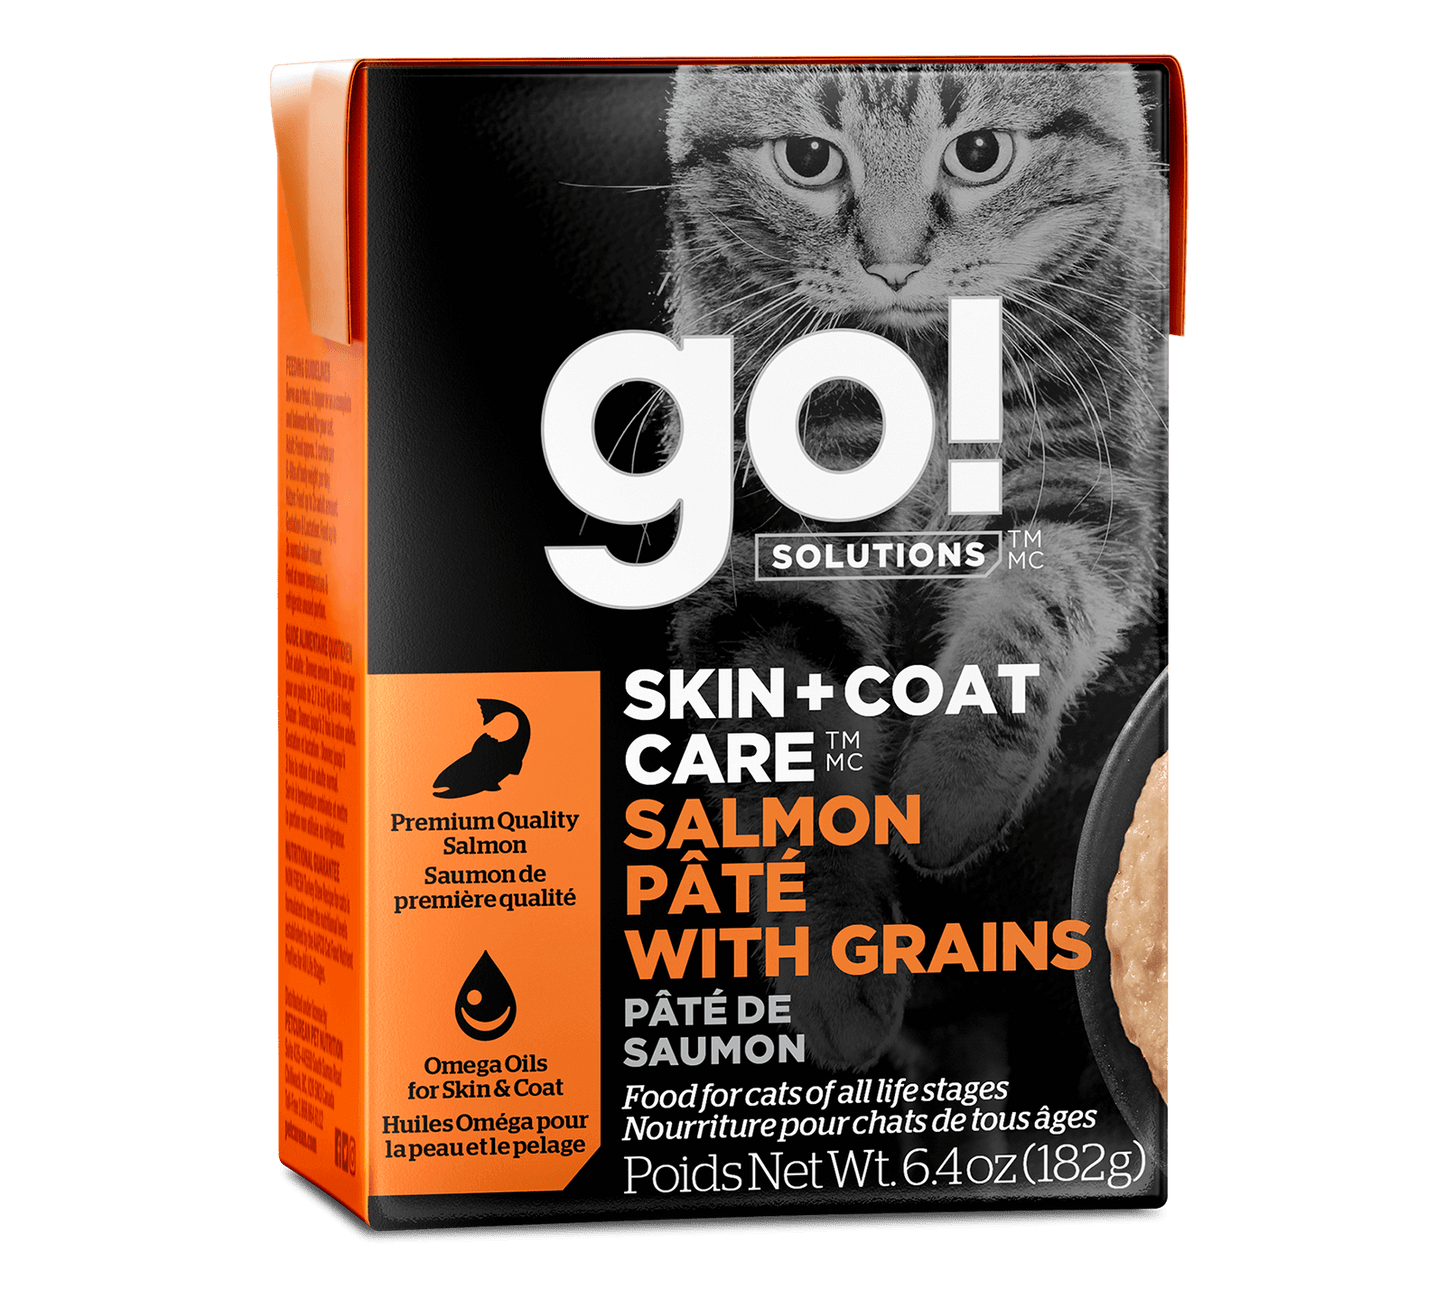 GO! SOLUTIONS SKIN + COAT CARE SALMON PÂTÉ WITH GRAINS FOR CATS